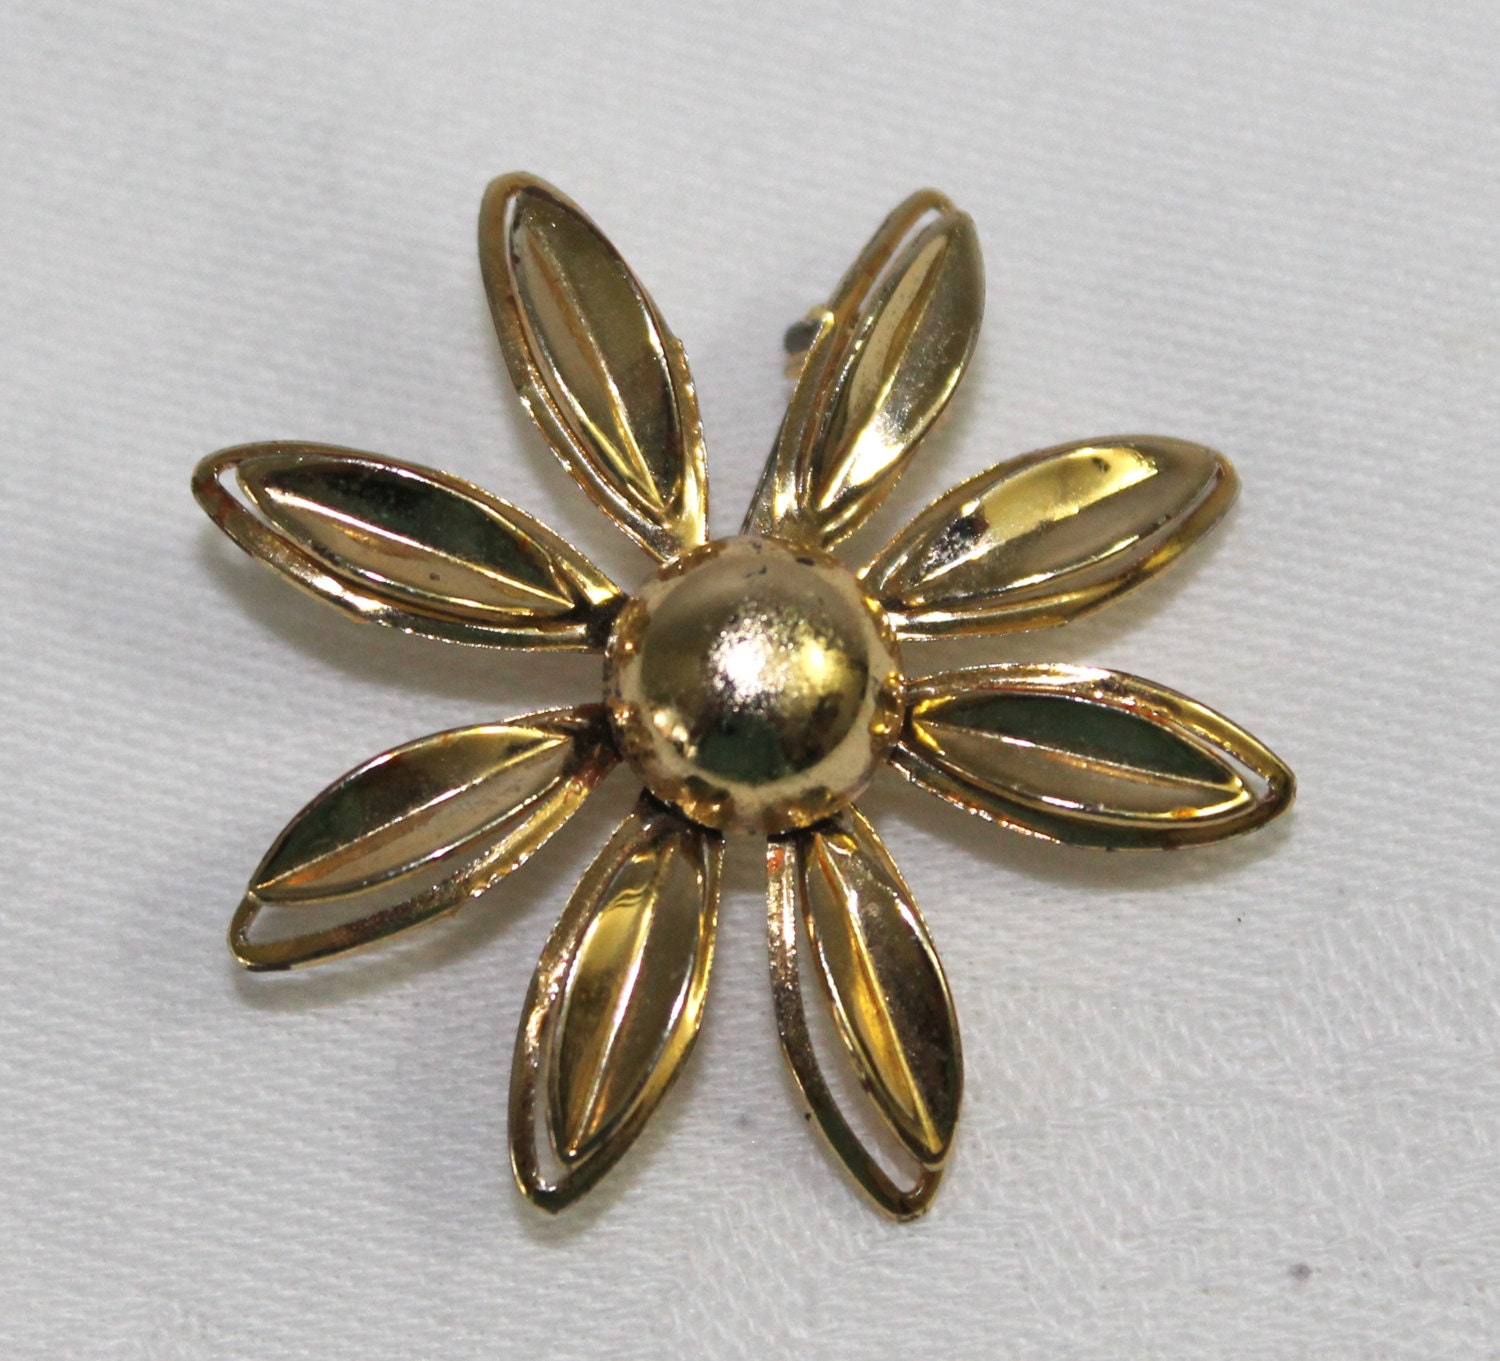 Vintage Gold Colored Daisy Brooch Pin